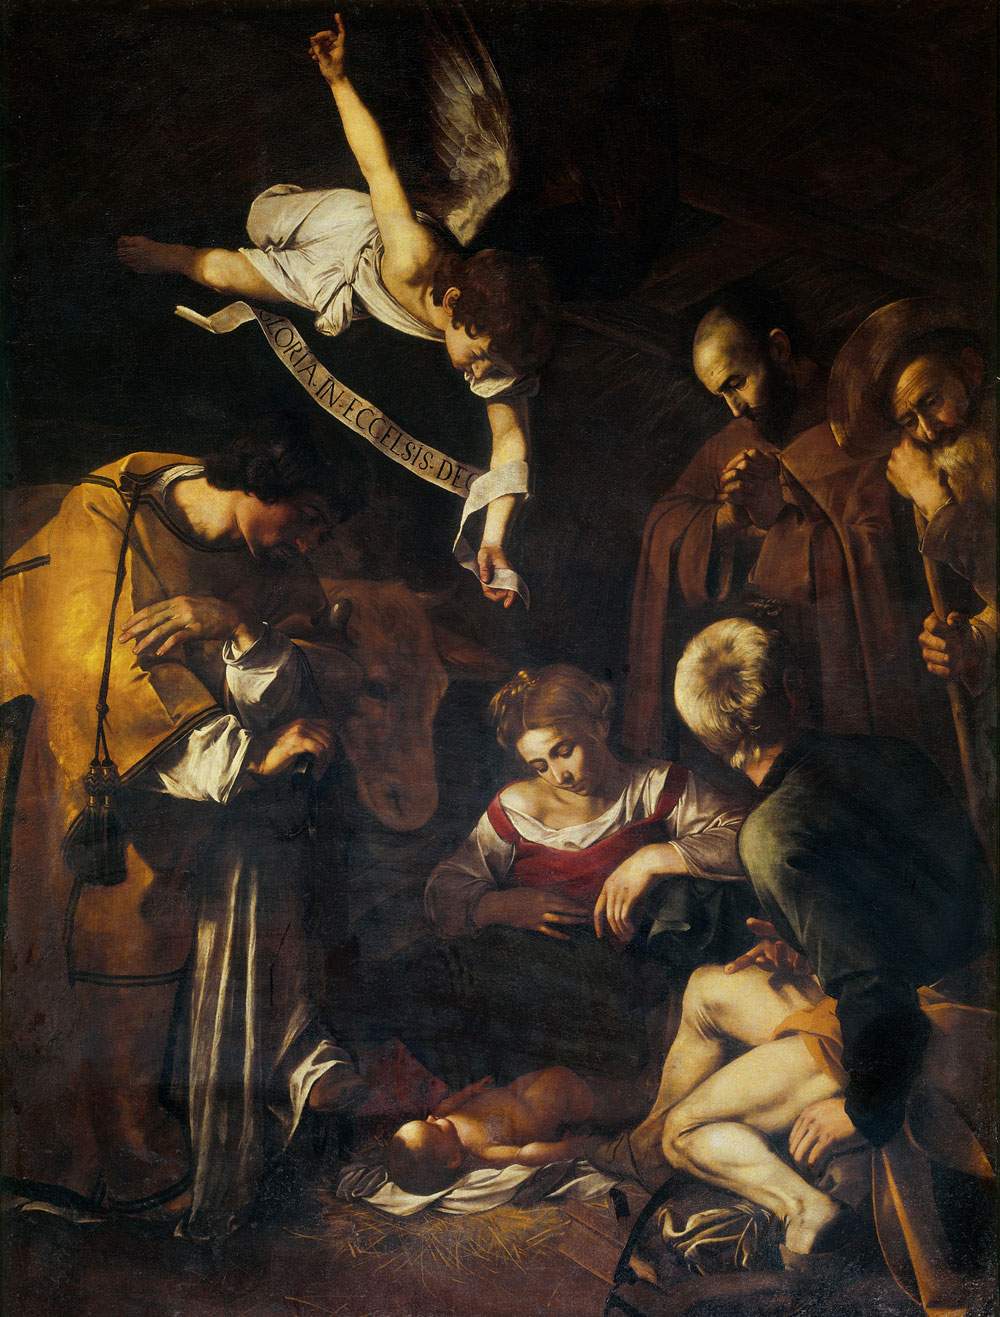 Tomaso Montanari on the theft of the Caravaggio. Preview of the new handbook Art. A natural and civil history